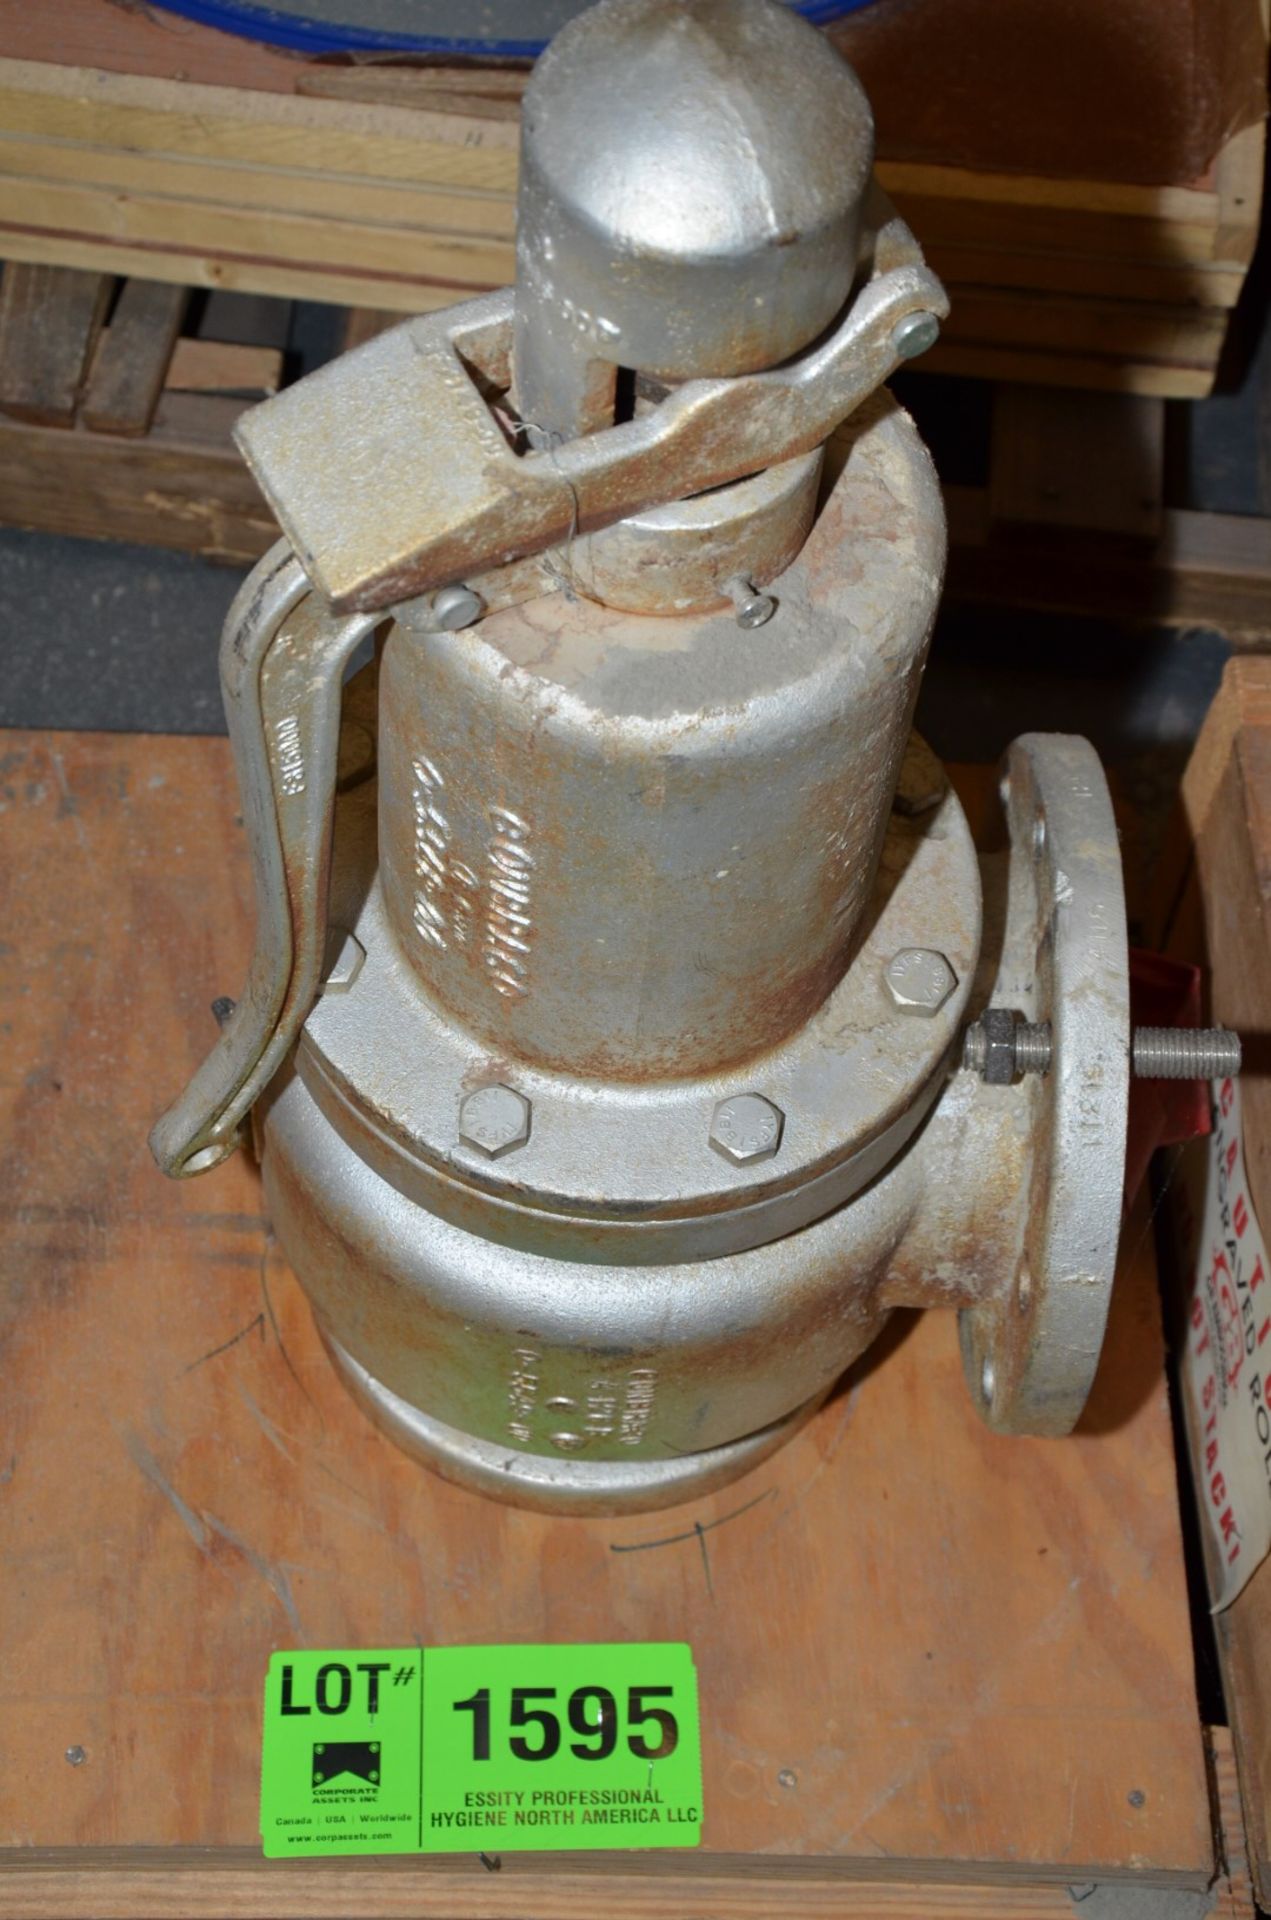 EMERSON SAFETY RELIEF VALVE [RIGGING FEE FOR LOT #1595 - $25 USD PLUS APPLICABLE TAXES]